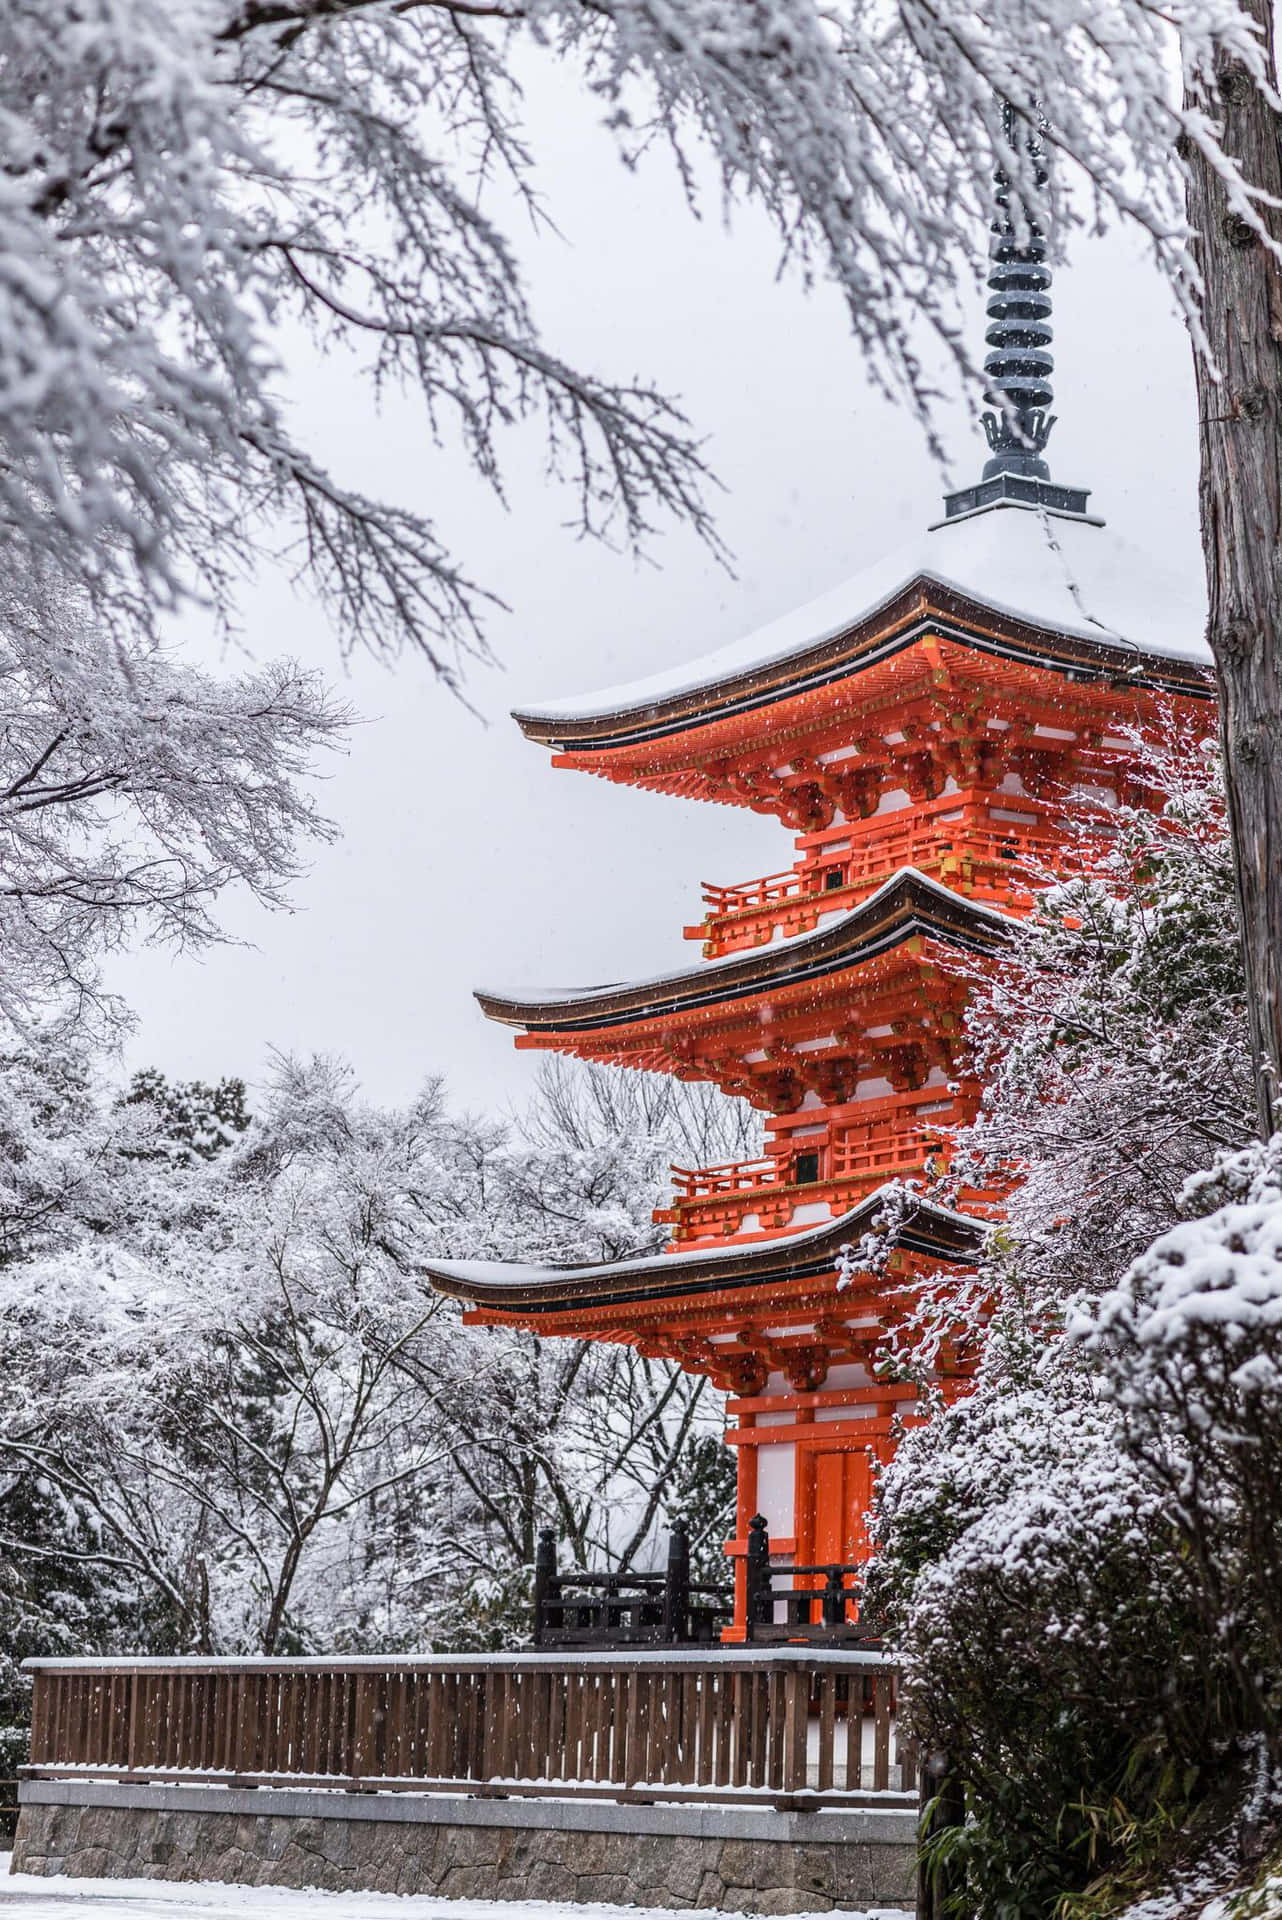 A Pagoda In The Snow With Trees Surrounding It